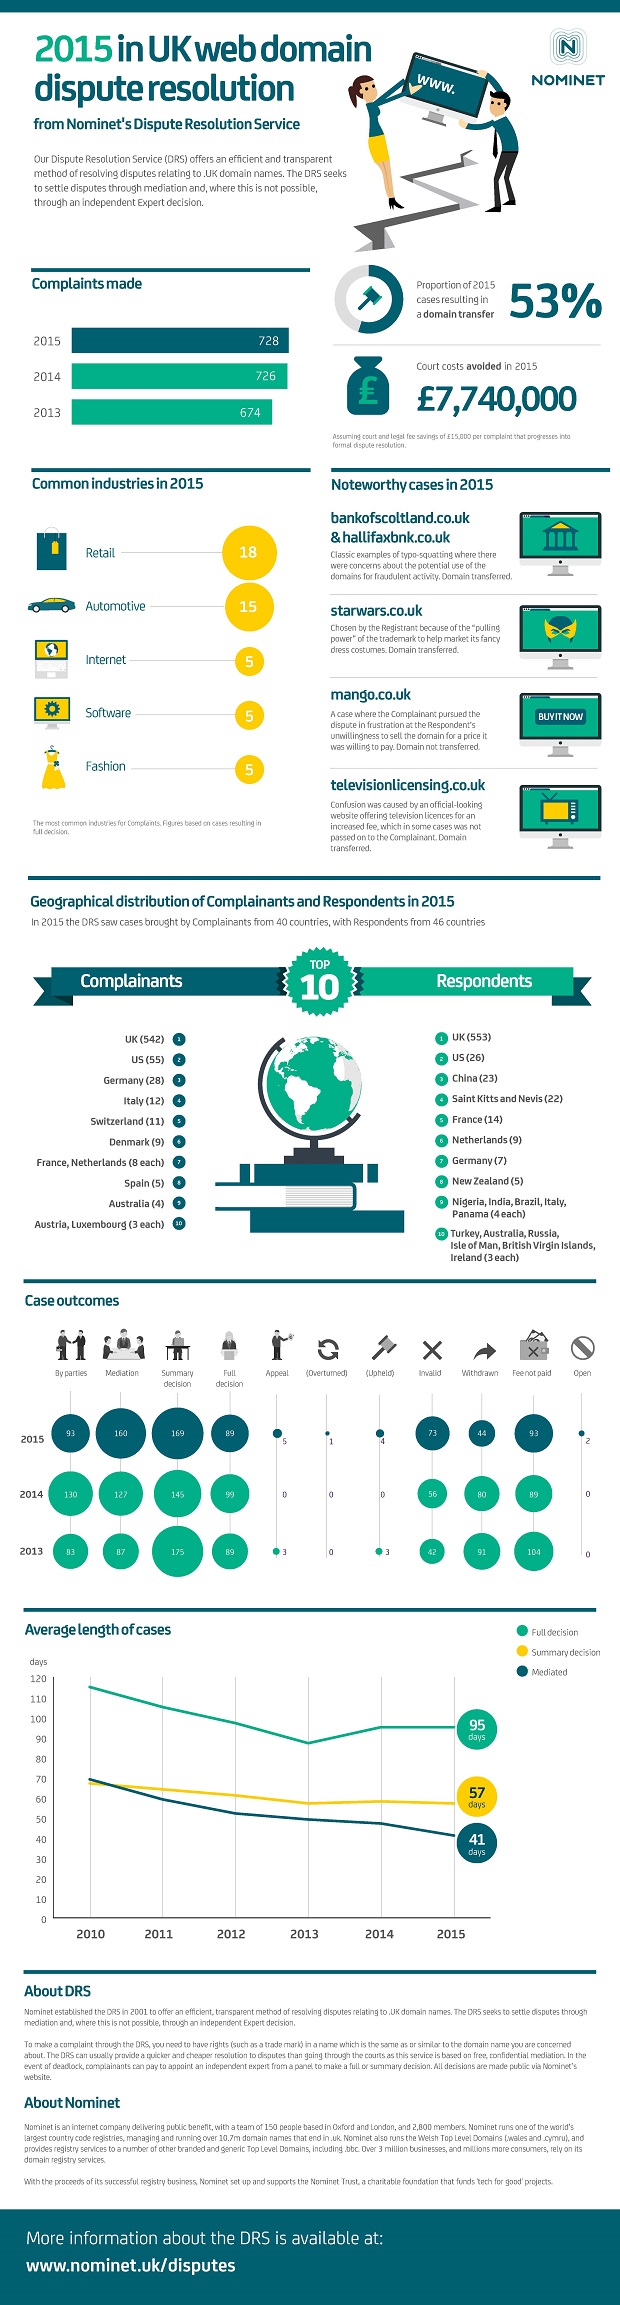 Nominet-DRS-Report-Infographic-2015.jpg